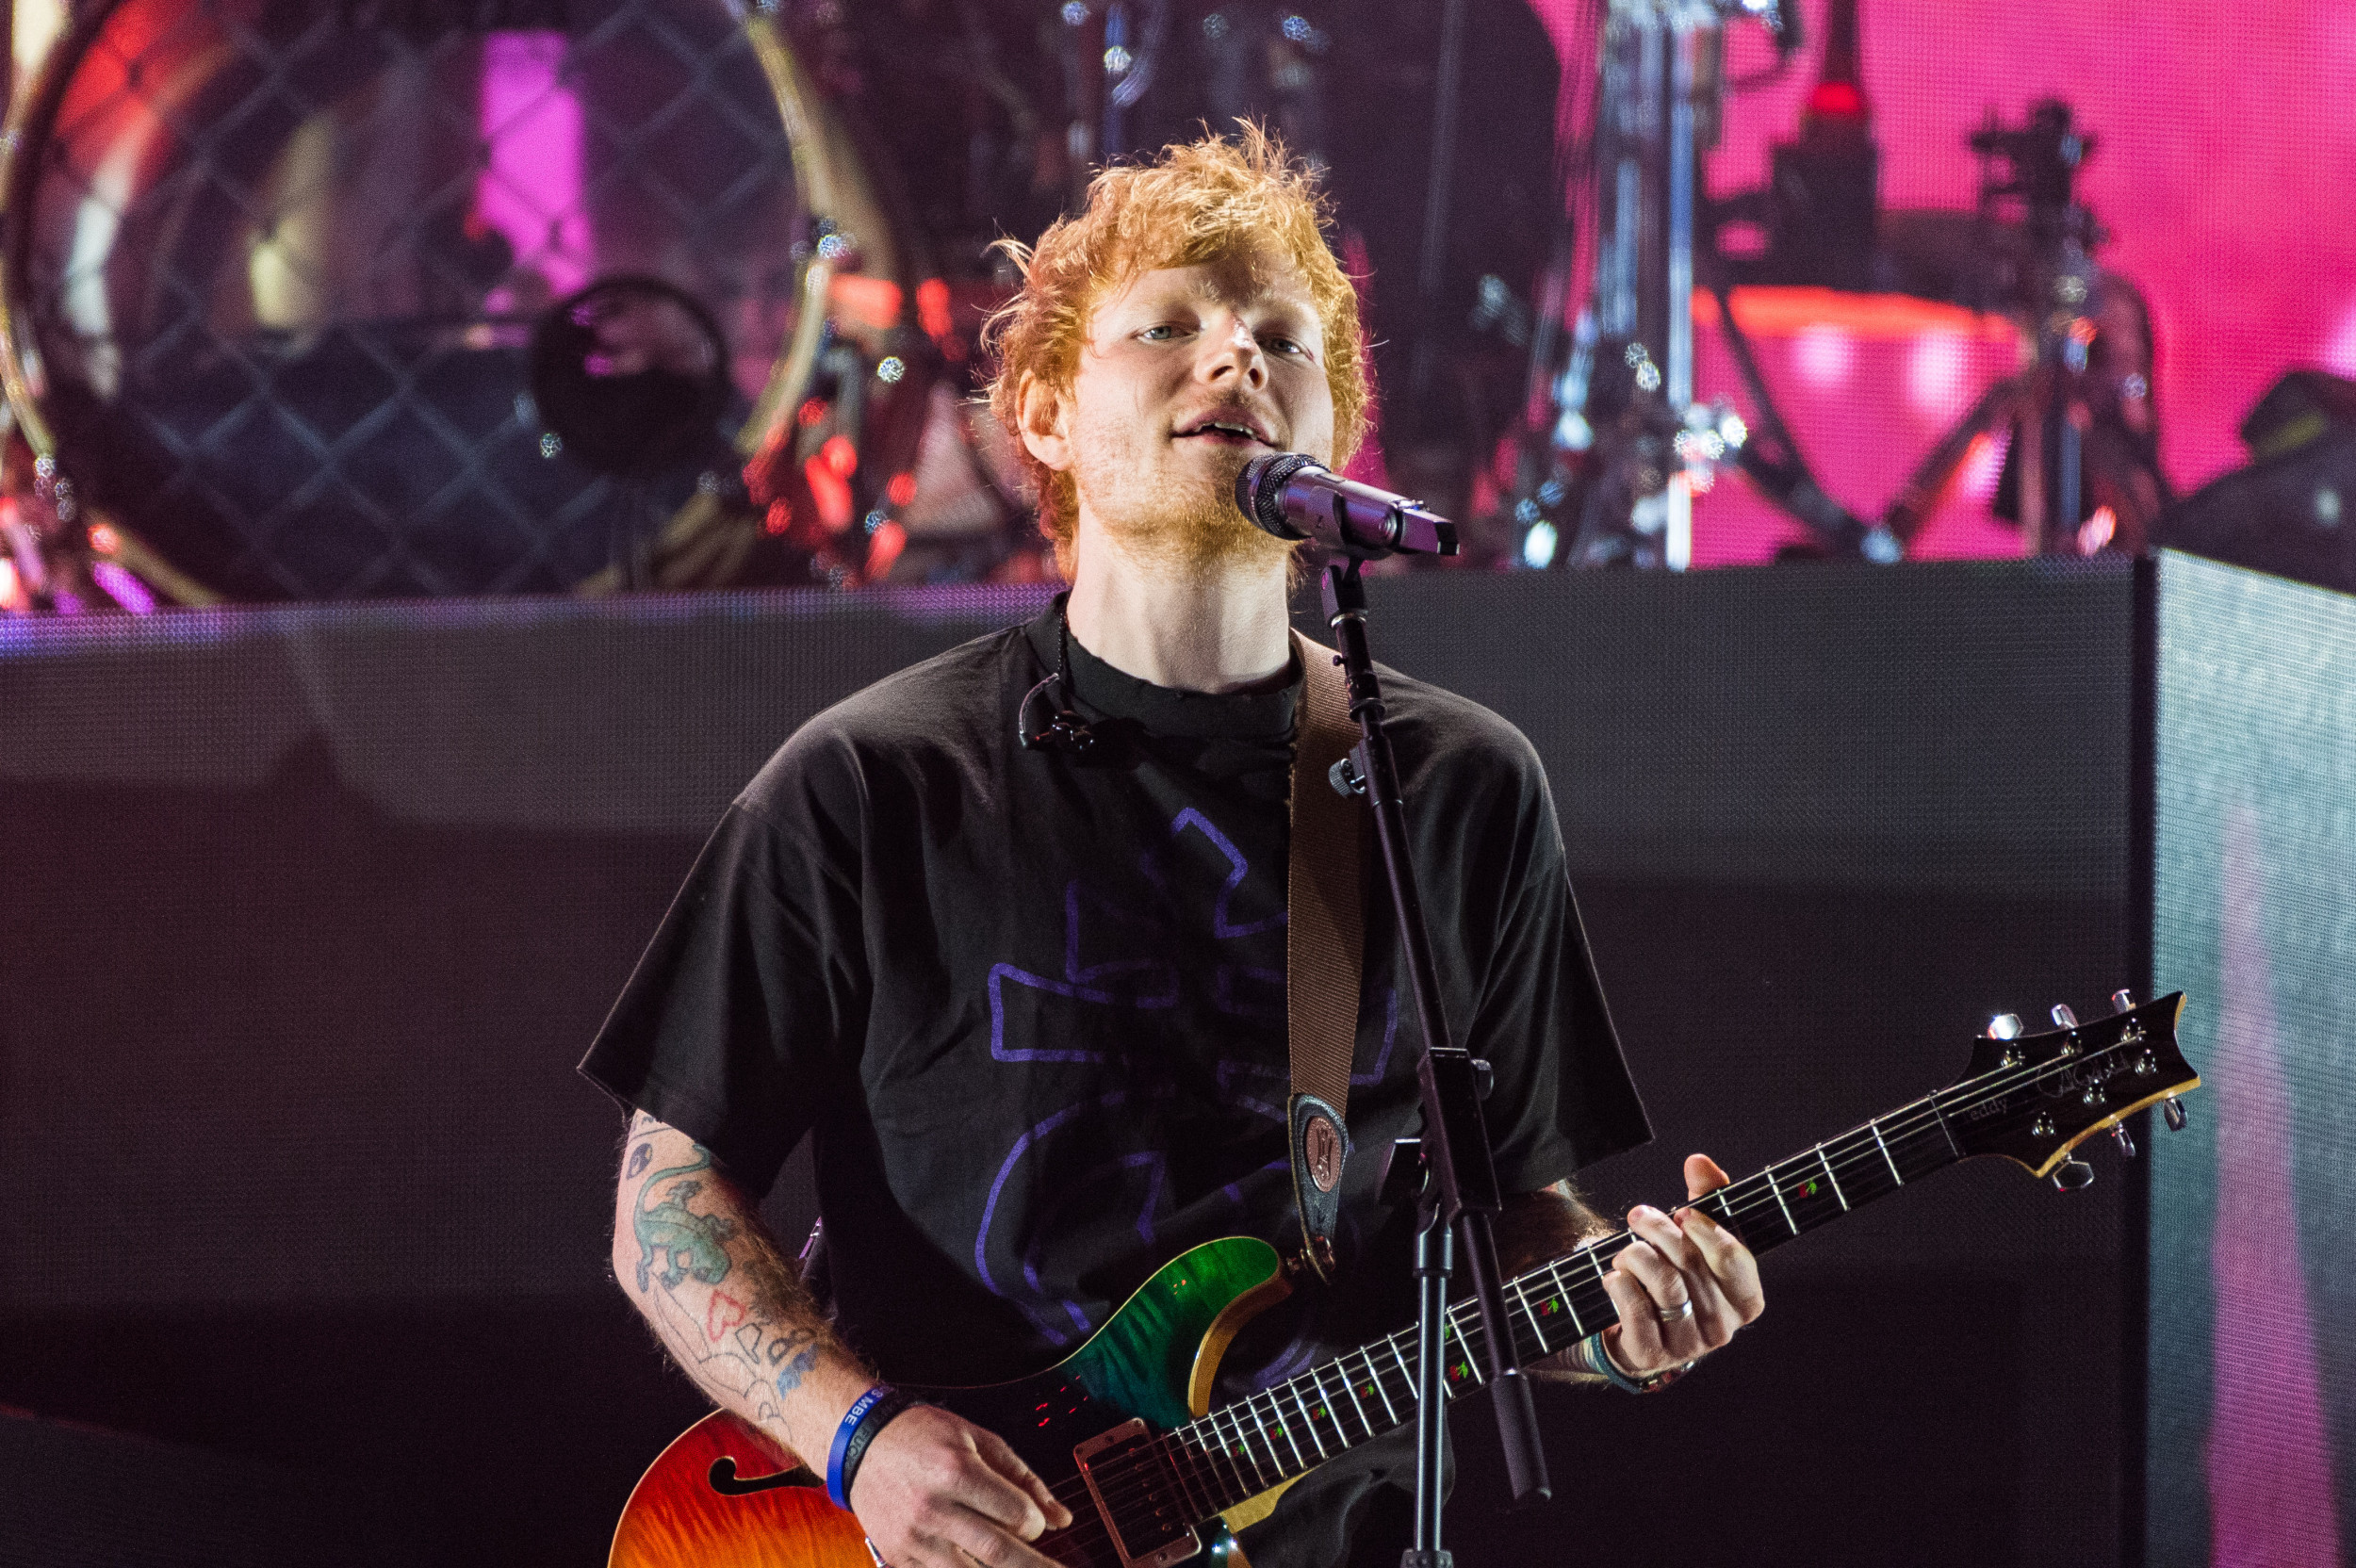 Ed Sheeran's 'Mathematics' Tour Dates, Venues and How to Get Tickets